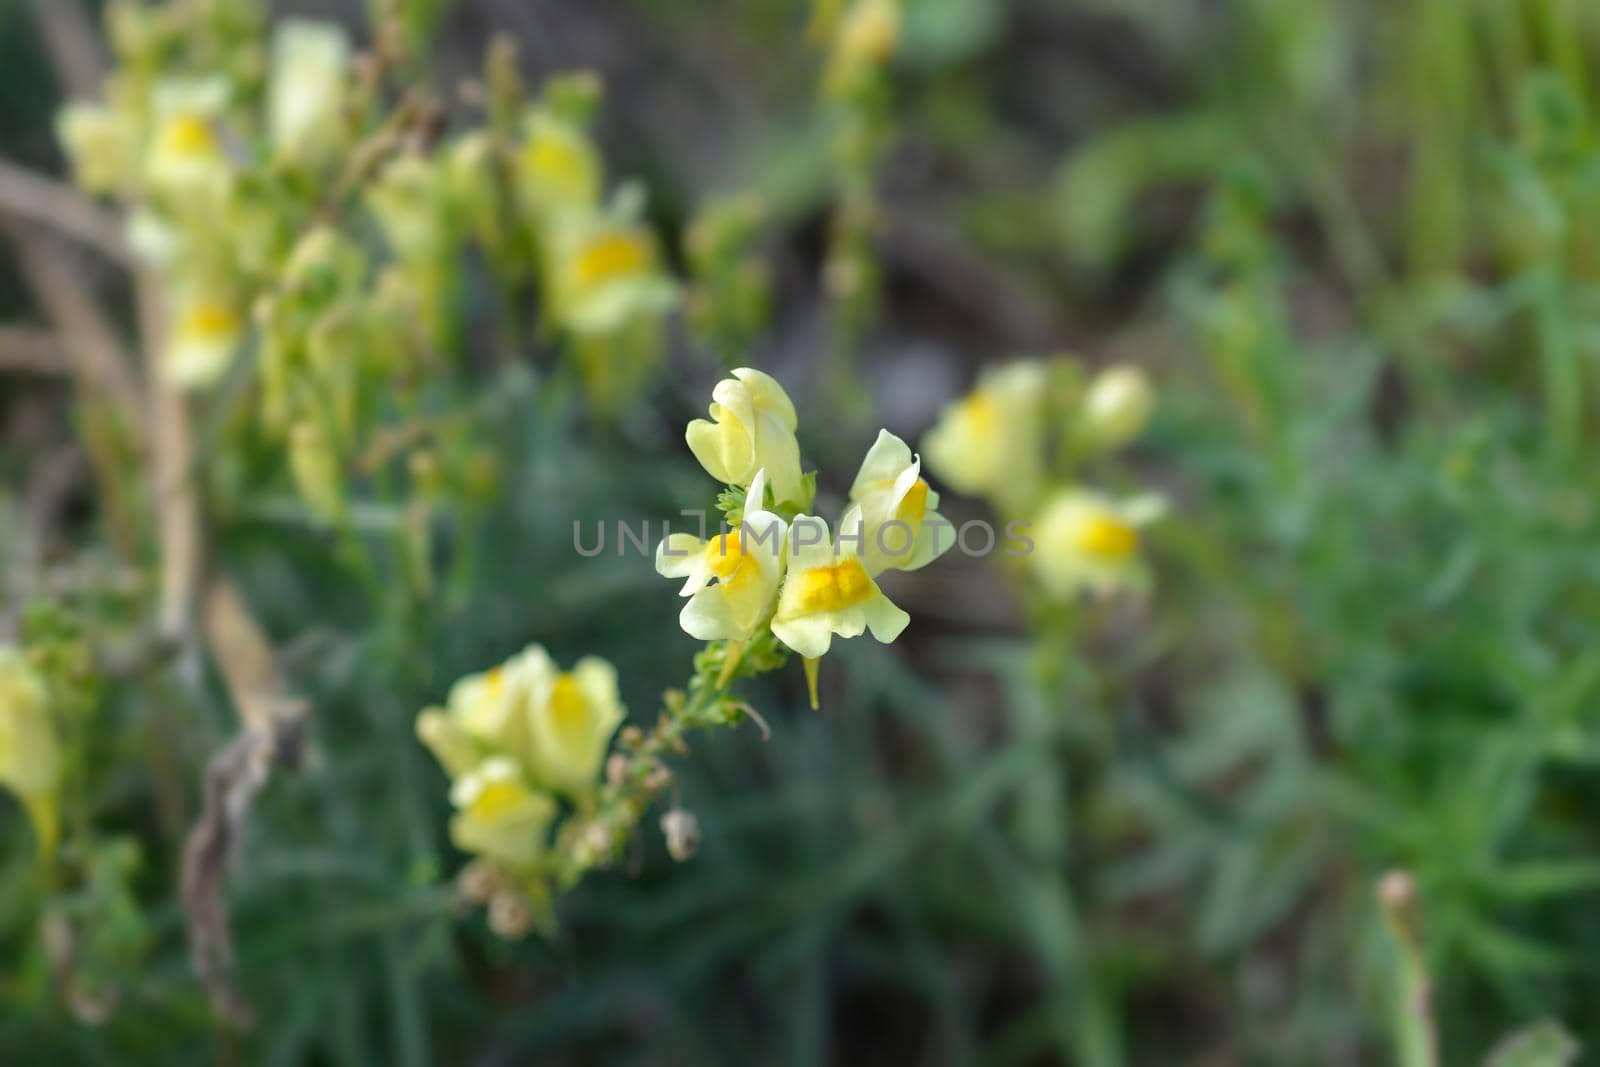 Common toadflax by nahhan